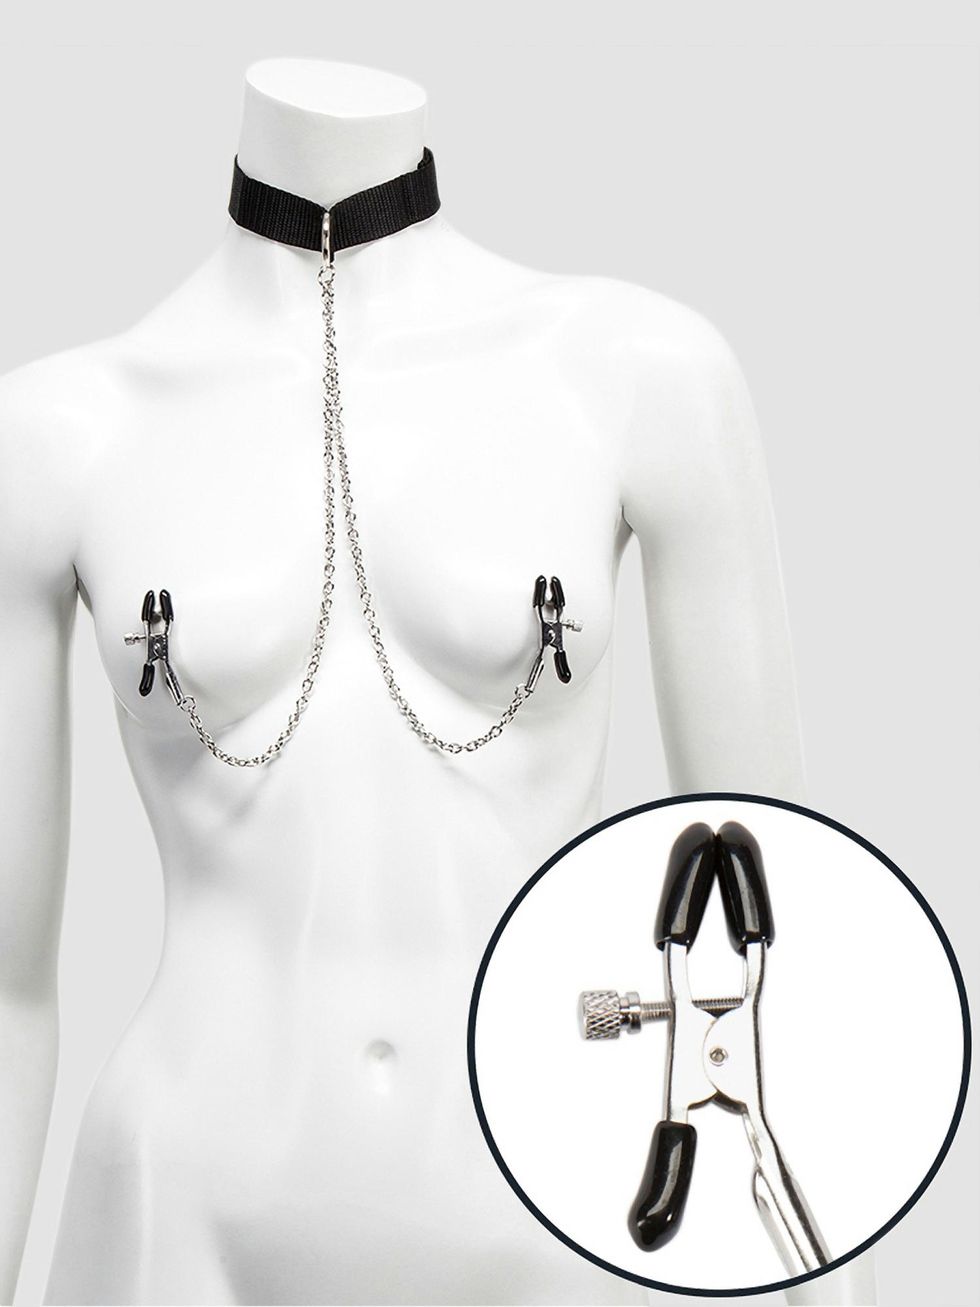 13 Best Nipple Clamps - How to Use Nipple Clamps Safely for Sex